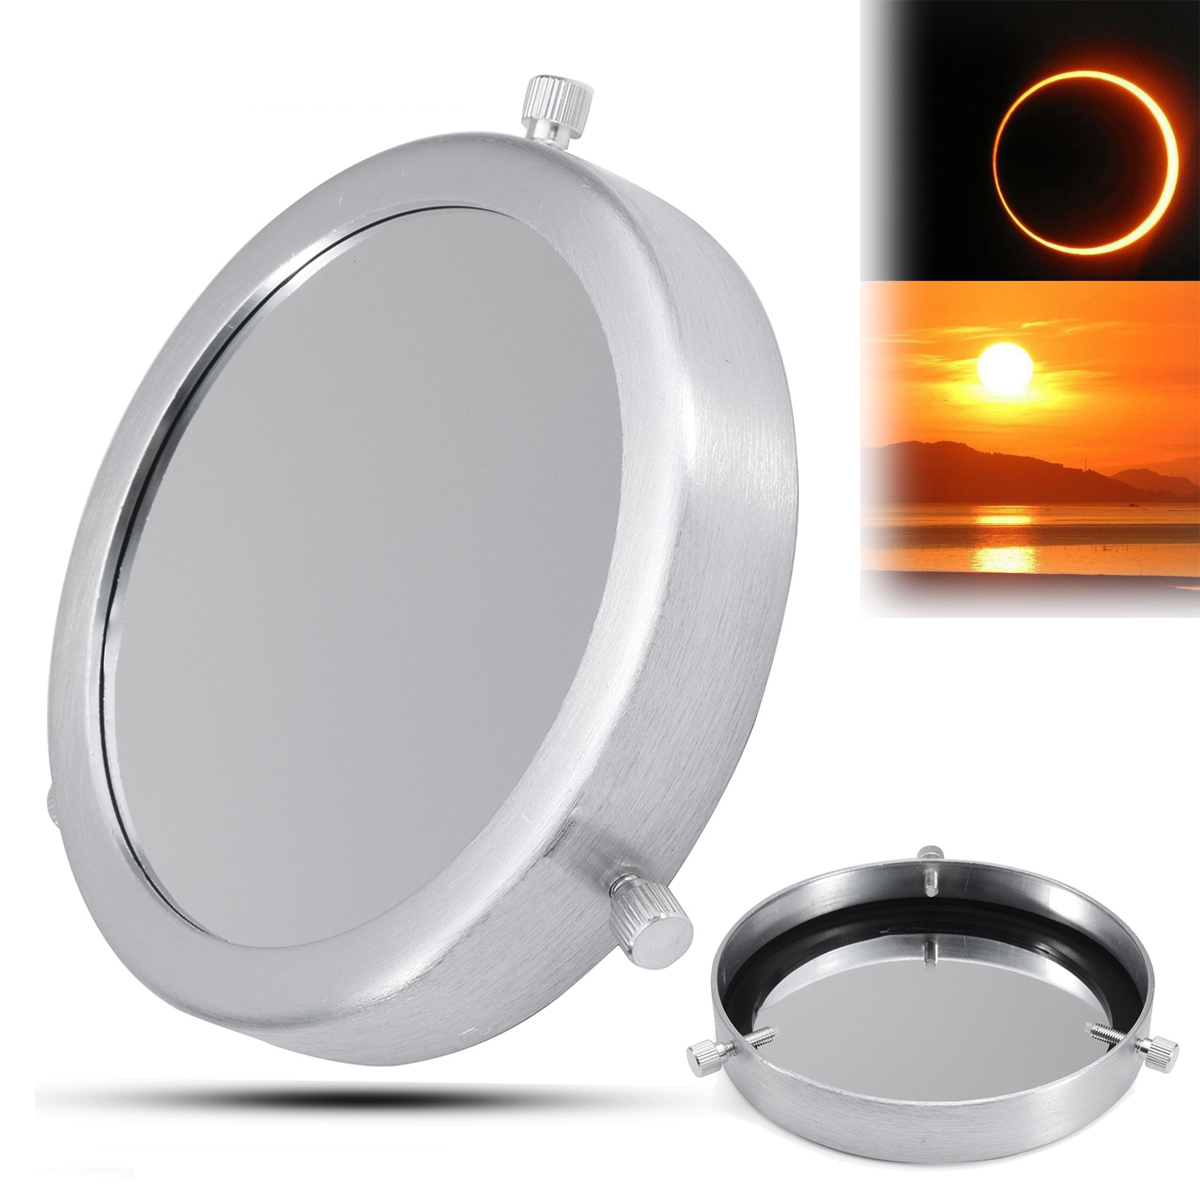 Silver 70-92mm Solar Filter Baader Film Metal Cover For Astronomical Telescope 2